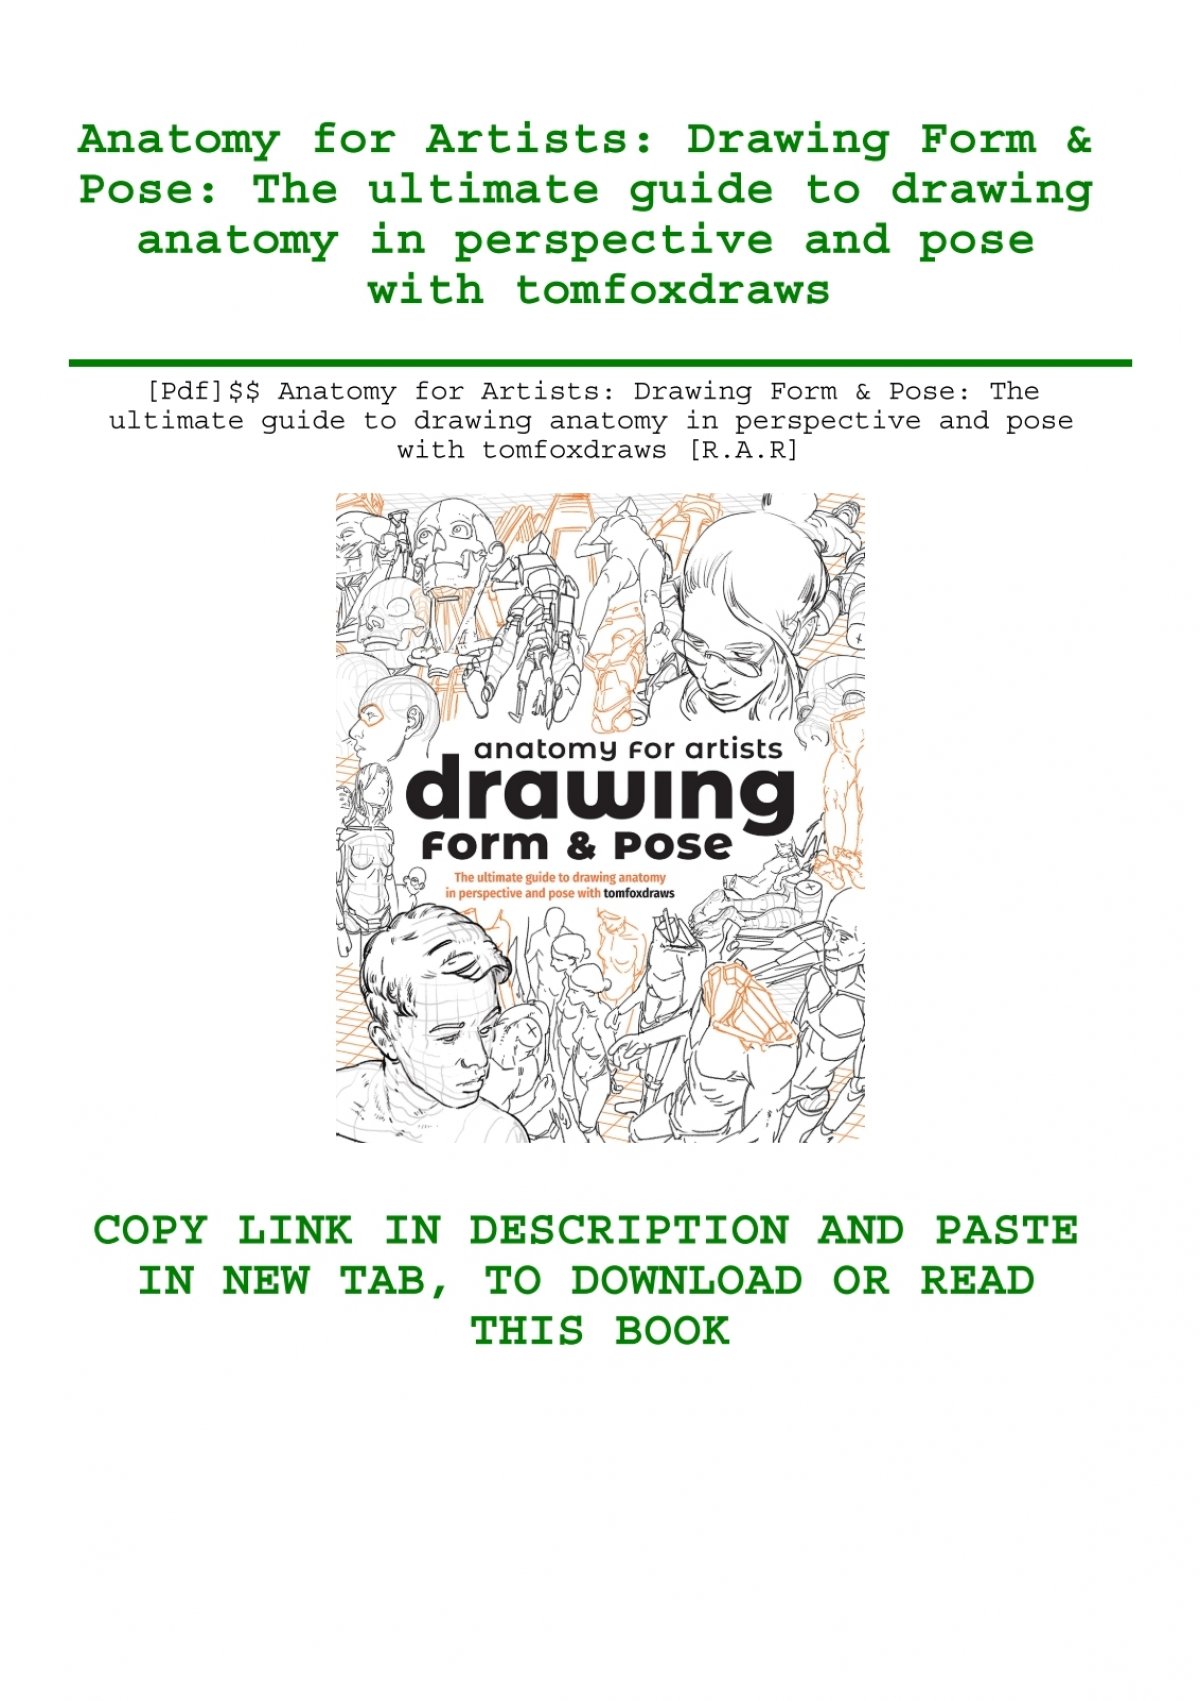 pdf-anatomy-for-artists-drawing-form-amp-pose-the-ultimate-guide